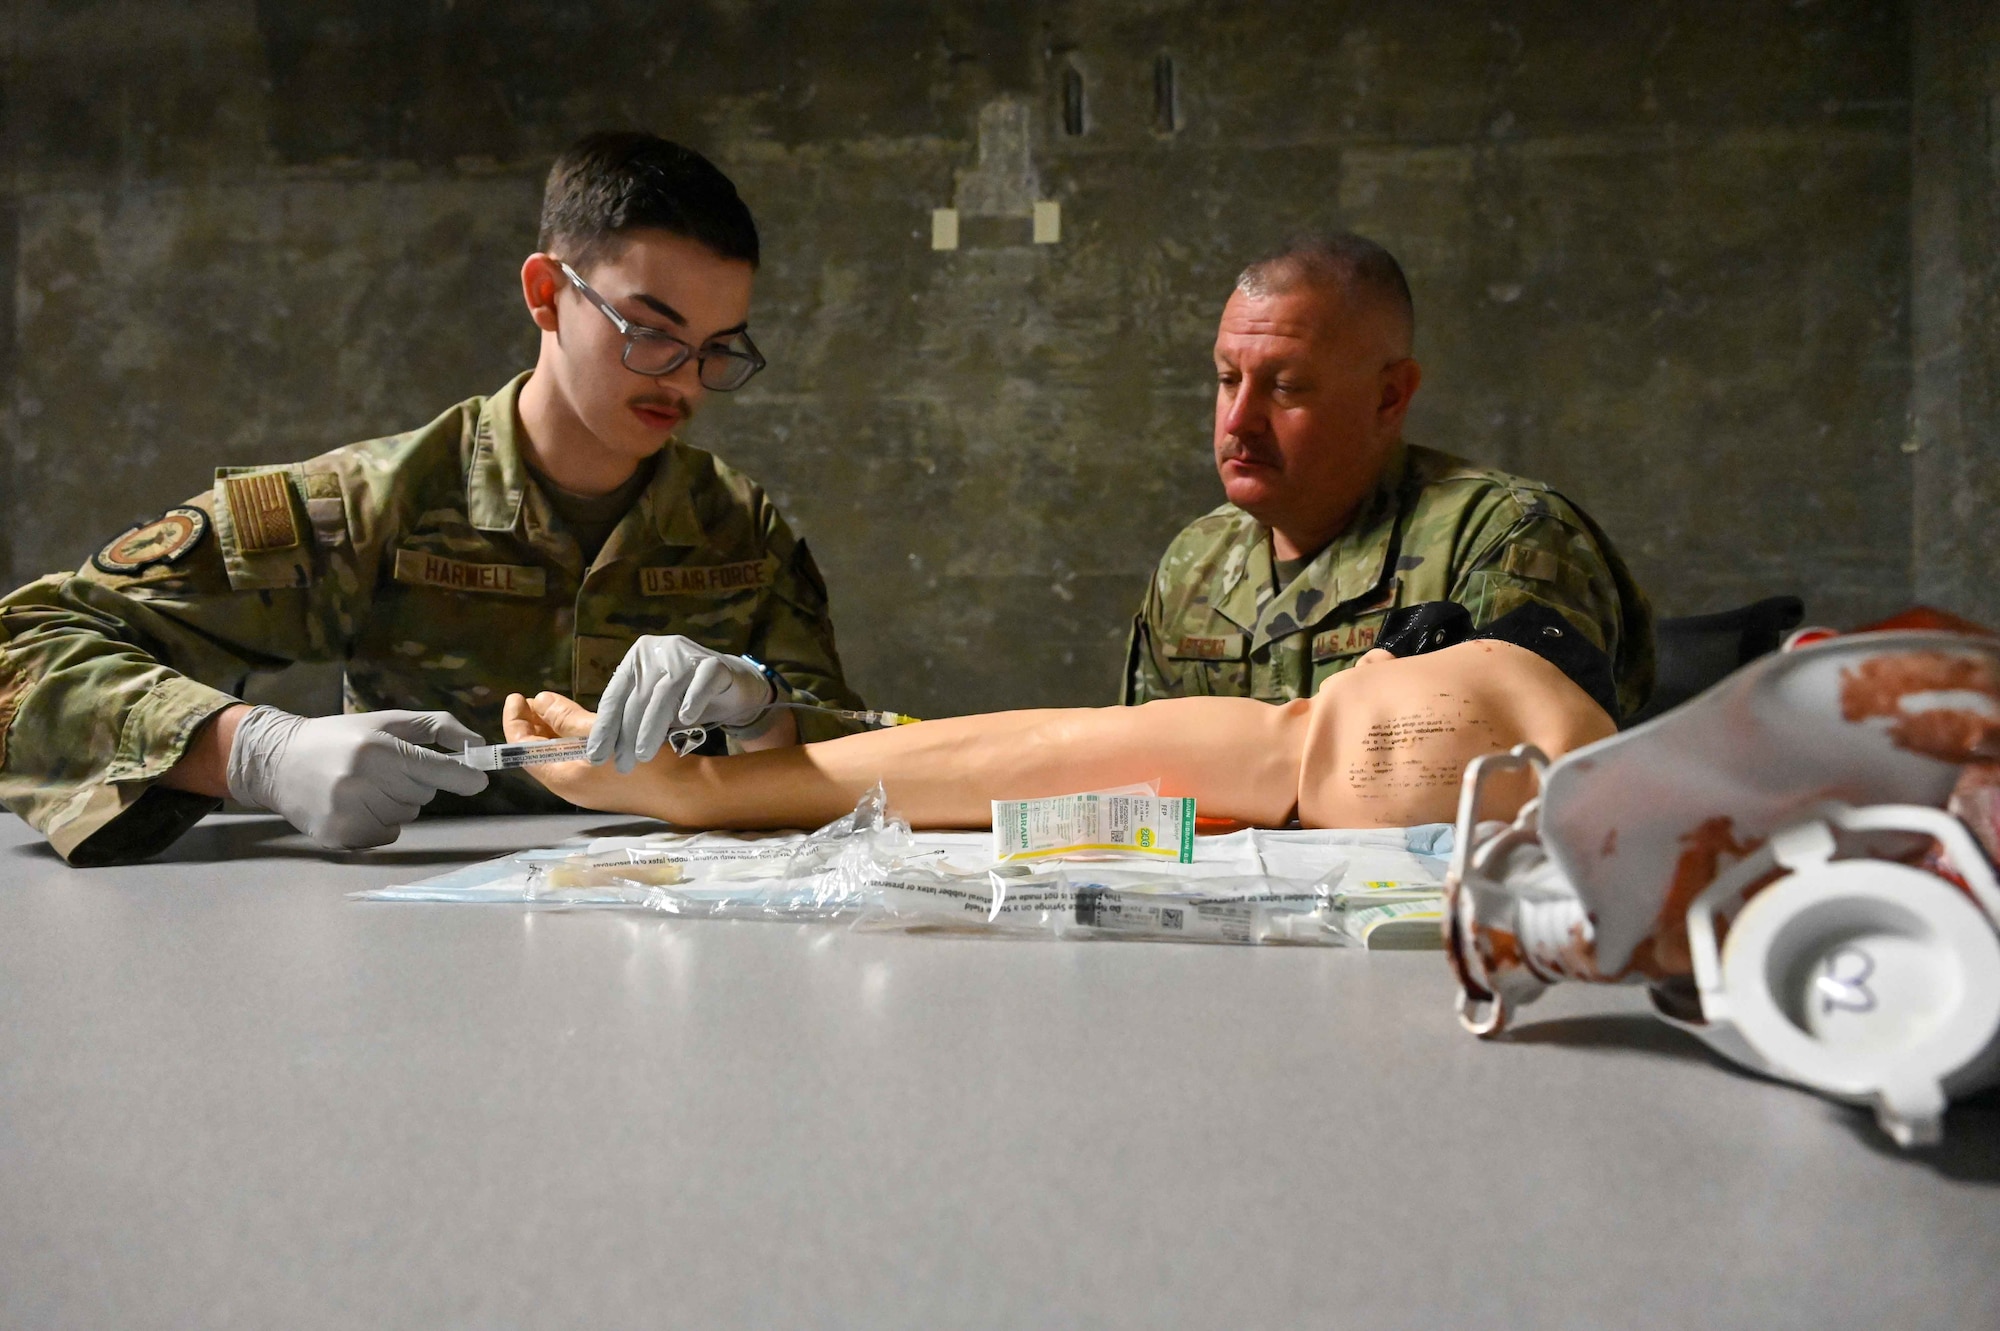 U.S. Air Force Airman 1st Class Mason Harwell, left, 97th Medical Group (MDG) aerospace medical technician, demonstrates to Chief Master Sgt. Justin Apticar, 19th Air Force command chief, right, how to insert an intravenous injection at Altus Air Force Base, Oklahoma, March 12, 2024. While at the 97th MDG, Apticar also learned how to create a dental mold. (U.S. Air Force photo by Airman 1st Class Kari Degraffenreed)